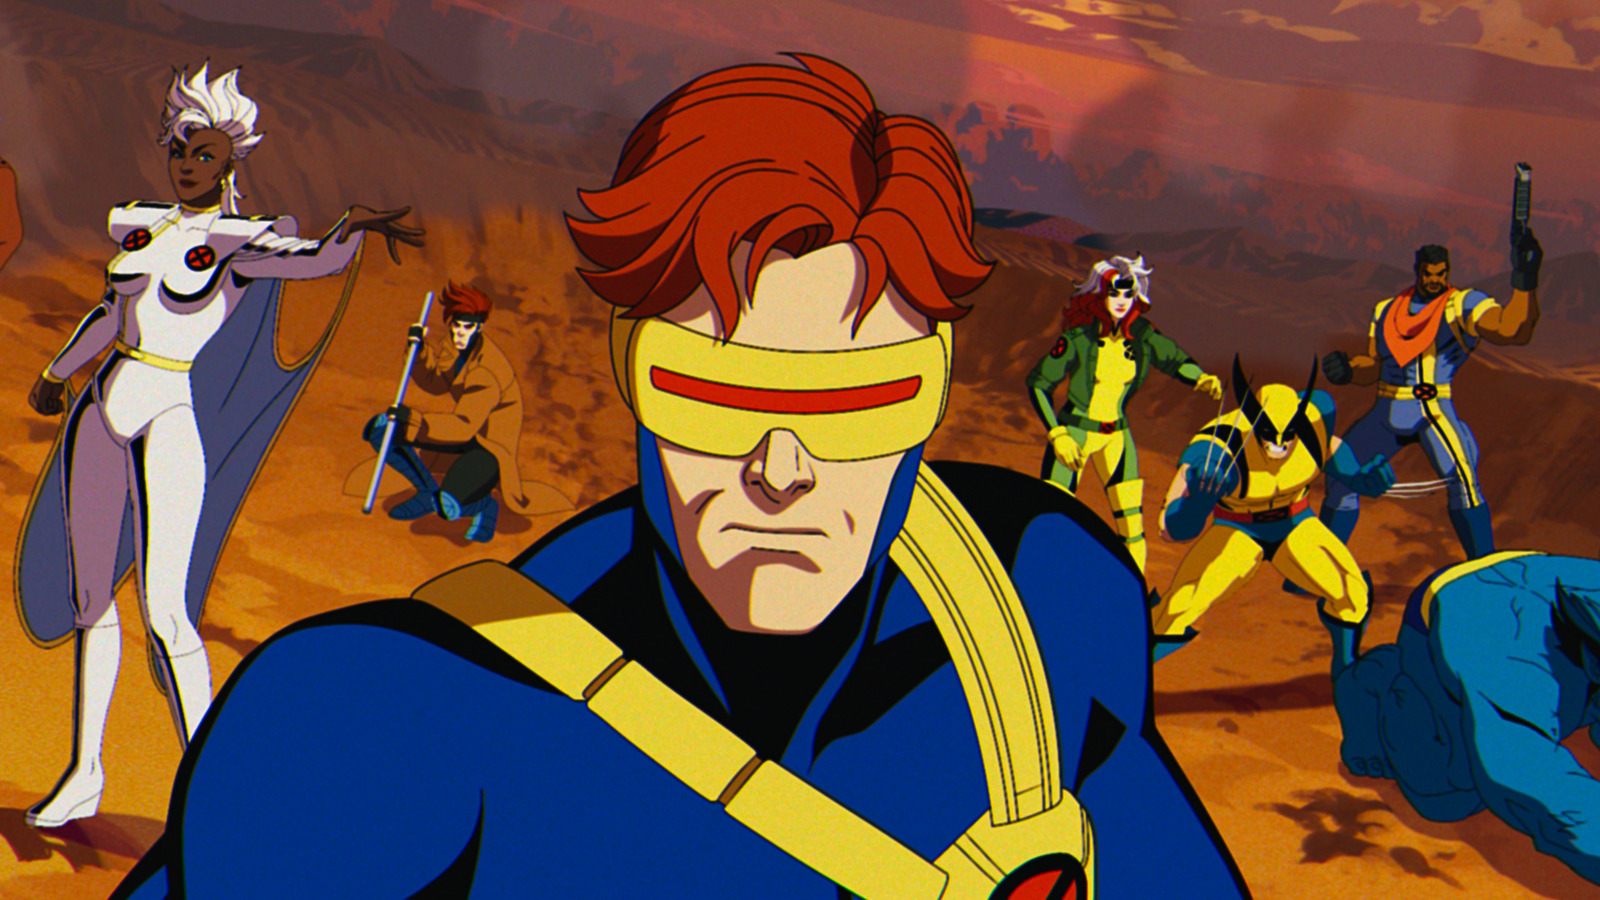 The Essential Aspect Of The Comics That X-Men ’97 Had To Get Right [Exclusive]